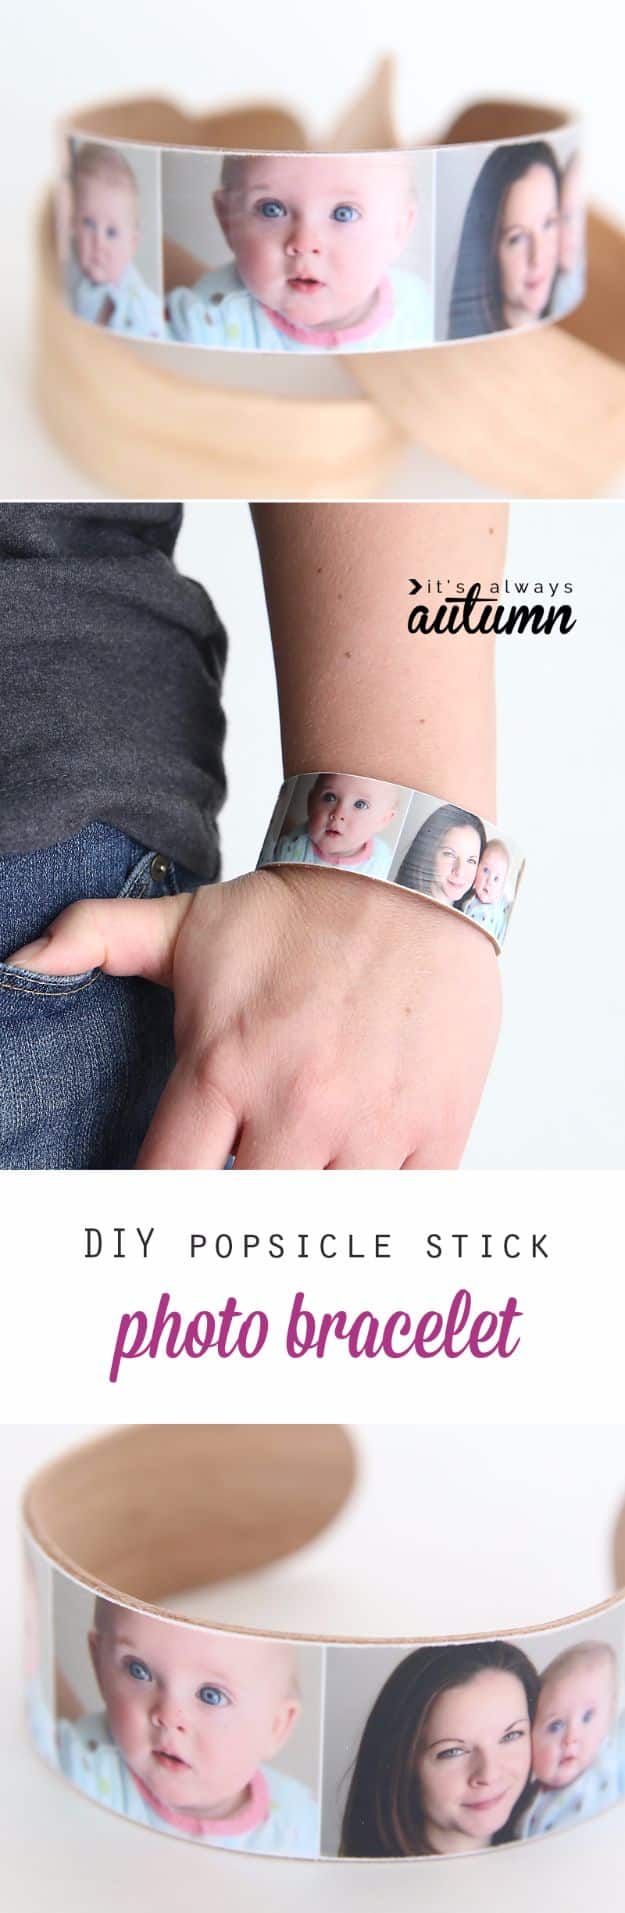 DIY Mothers Day Gift Ideas - DIY Popsicle Stick Photo Bracelet - Homemade Gifts for Moms - Crafts and Do It Yourself Home Decor, Accessories and Fashion To Make For Mom - Mothers Love Handmade Presents on Mother's Day - DIY Projects and Crafts by DIY JOY 